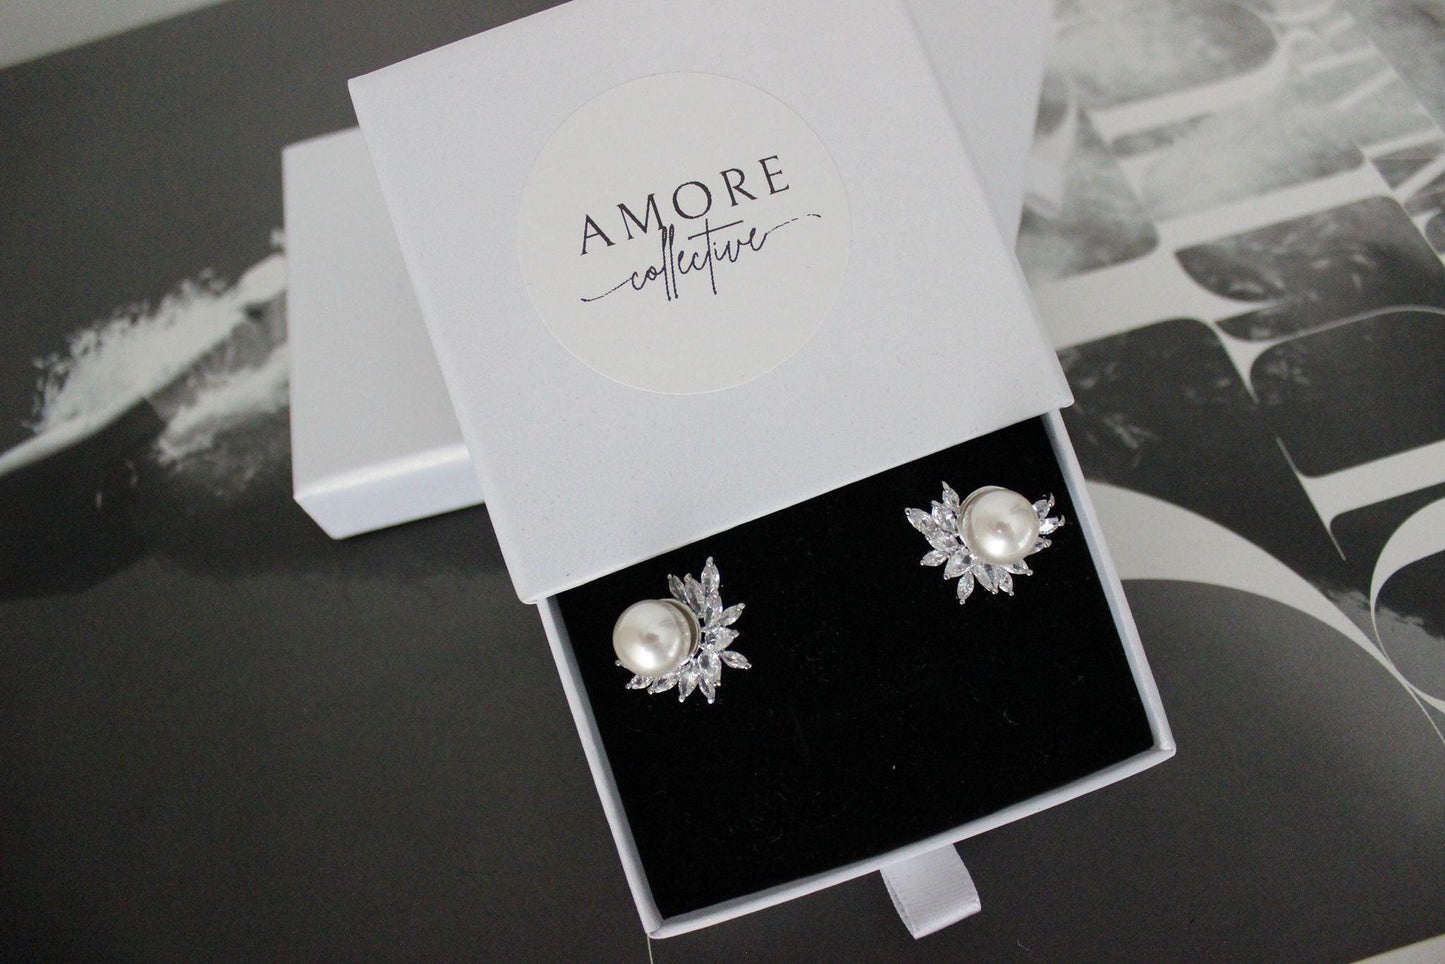 Amore Collective bridal wedding accessories earrings cubic zirconia